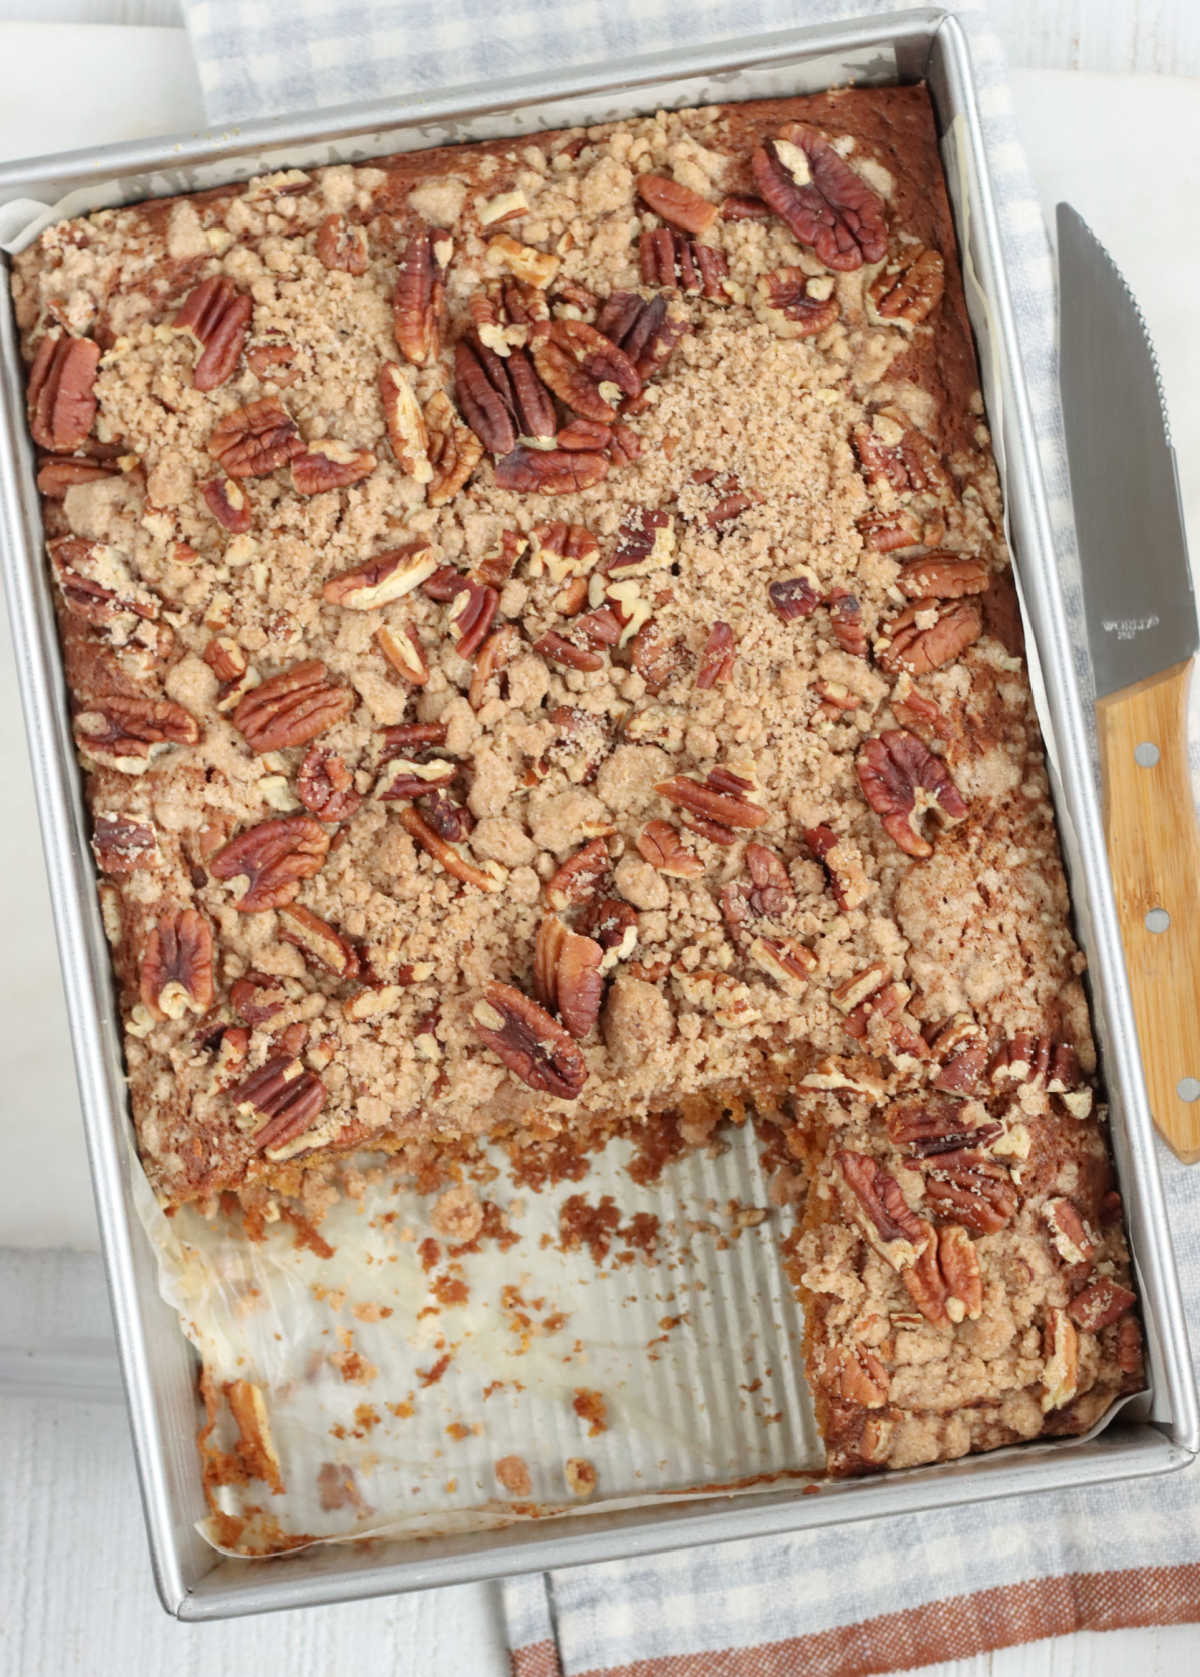 Rectangle baking pan with cake with crumb and pecan topping.